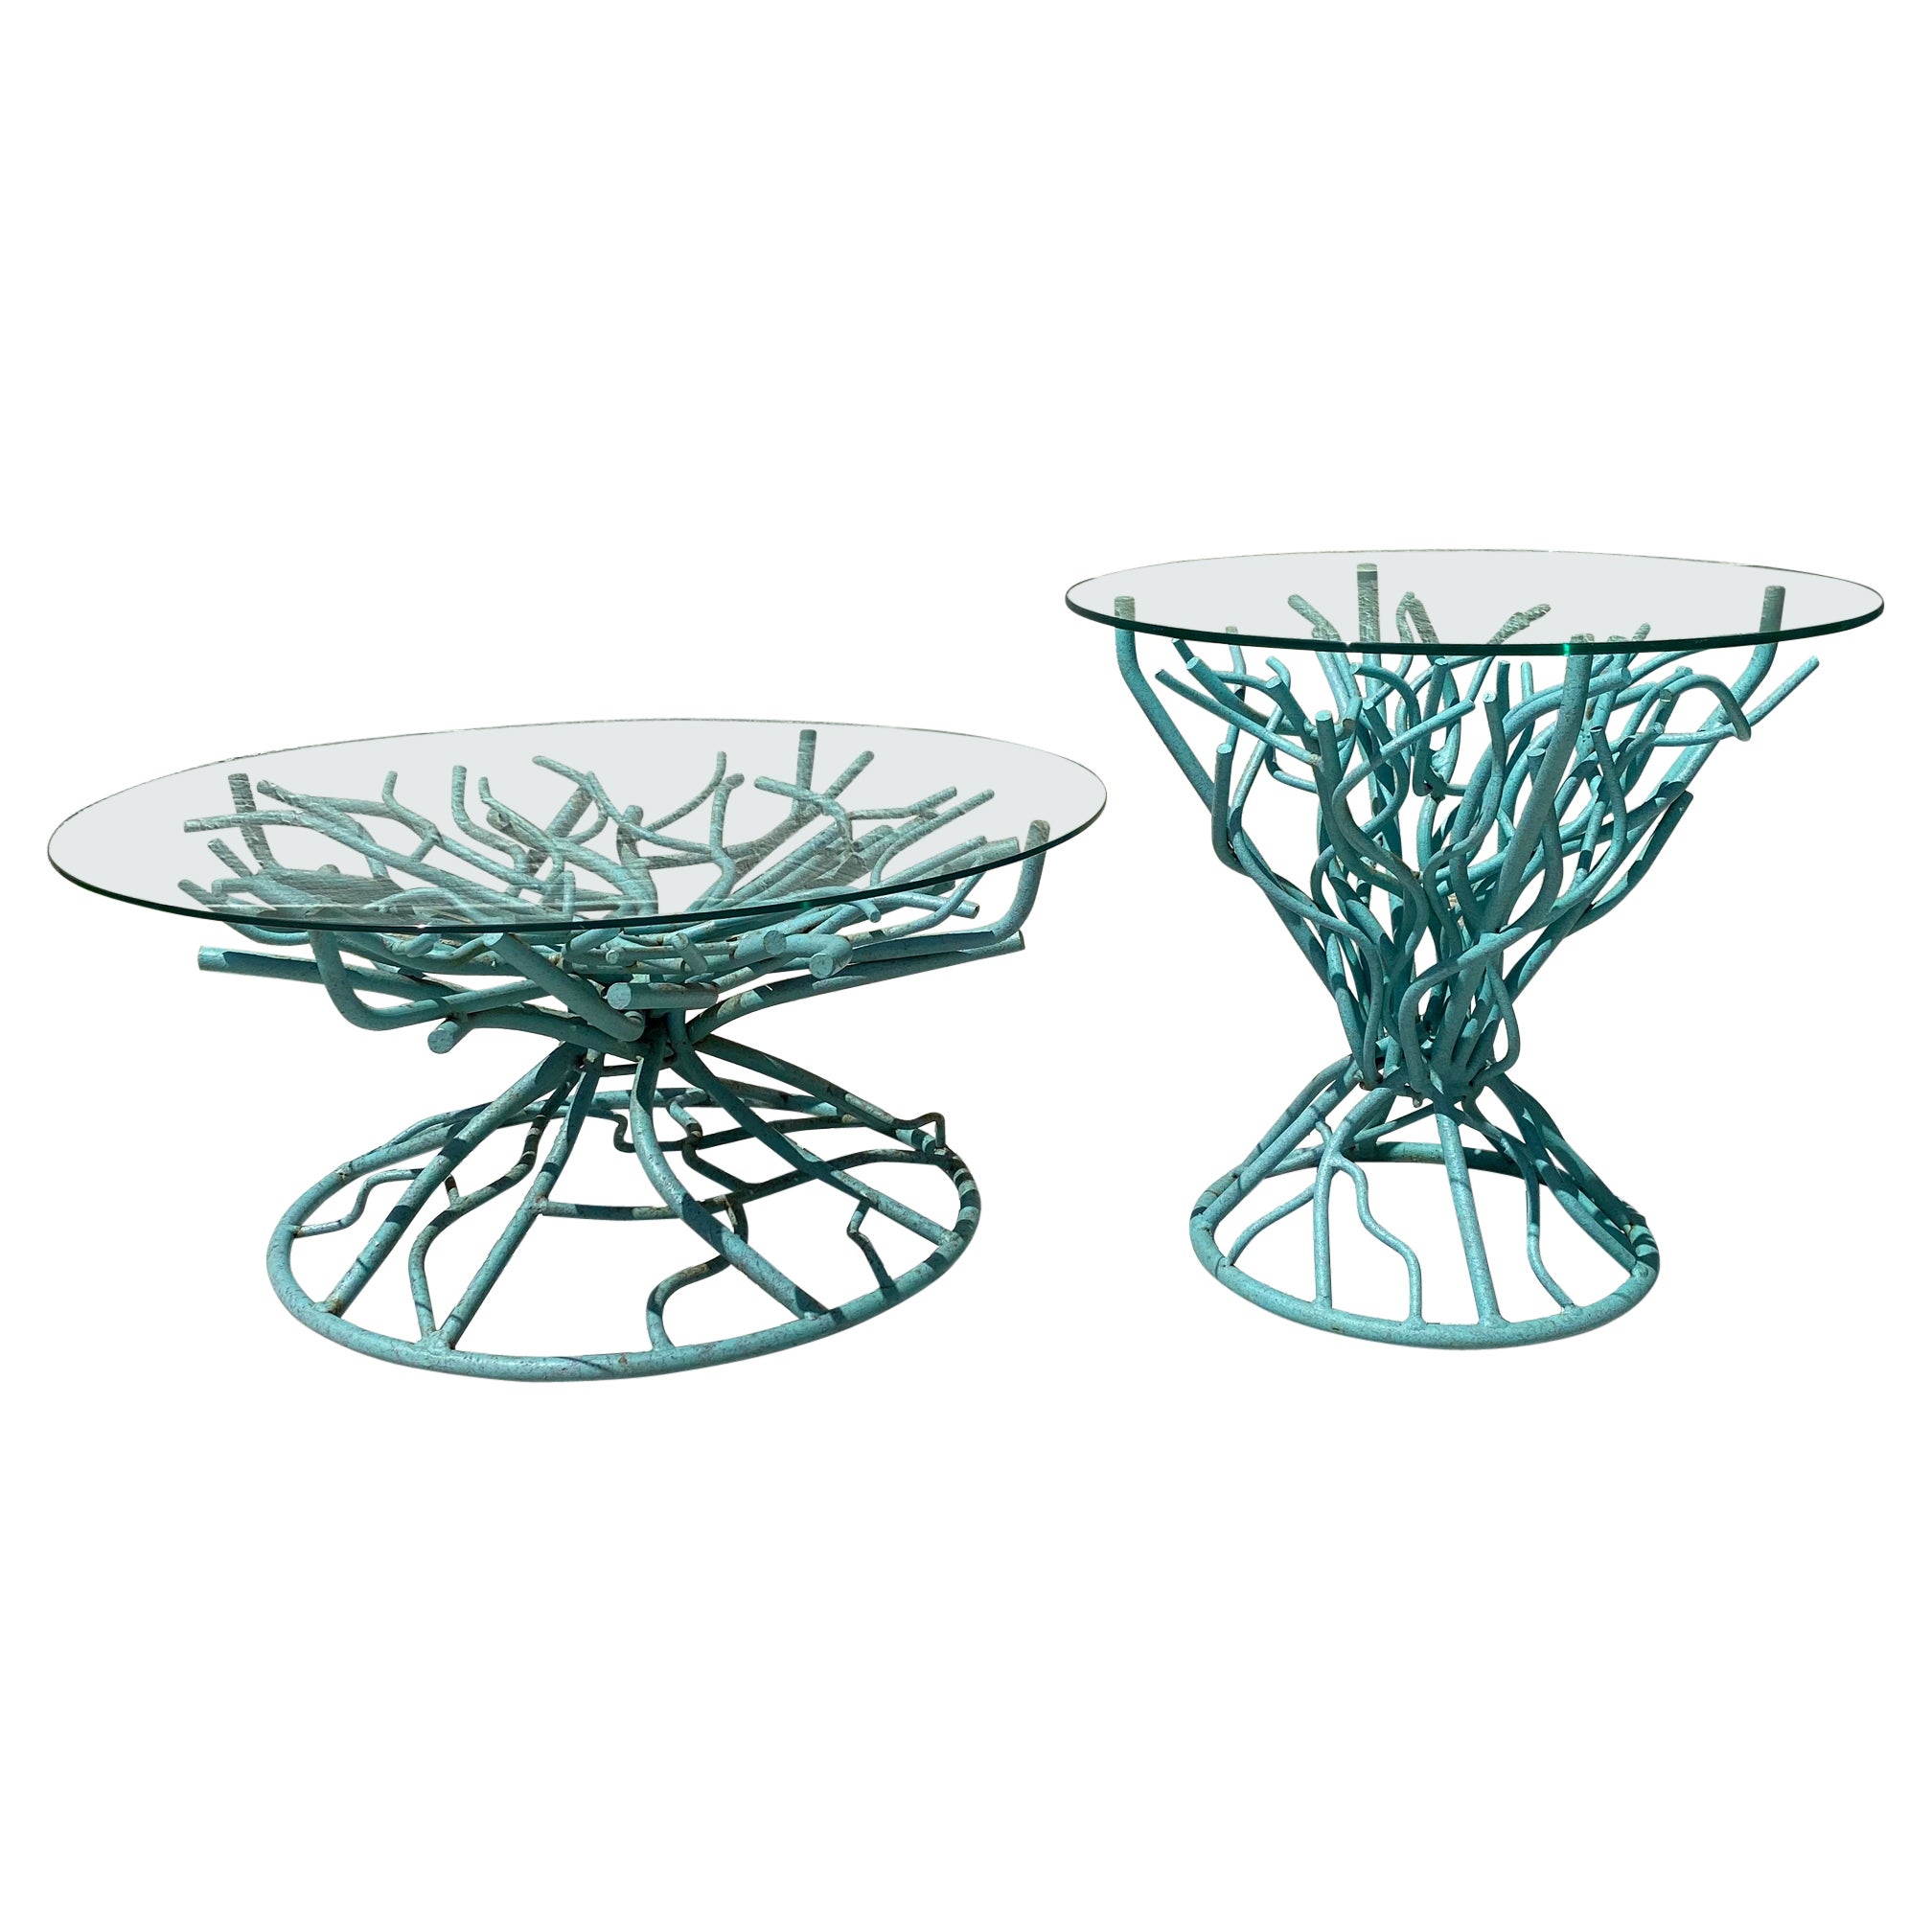 1970s Sculptural Iron Faux Coral Torqouise Table, set of 2 For Sale